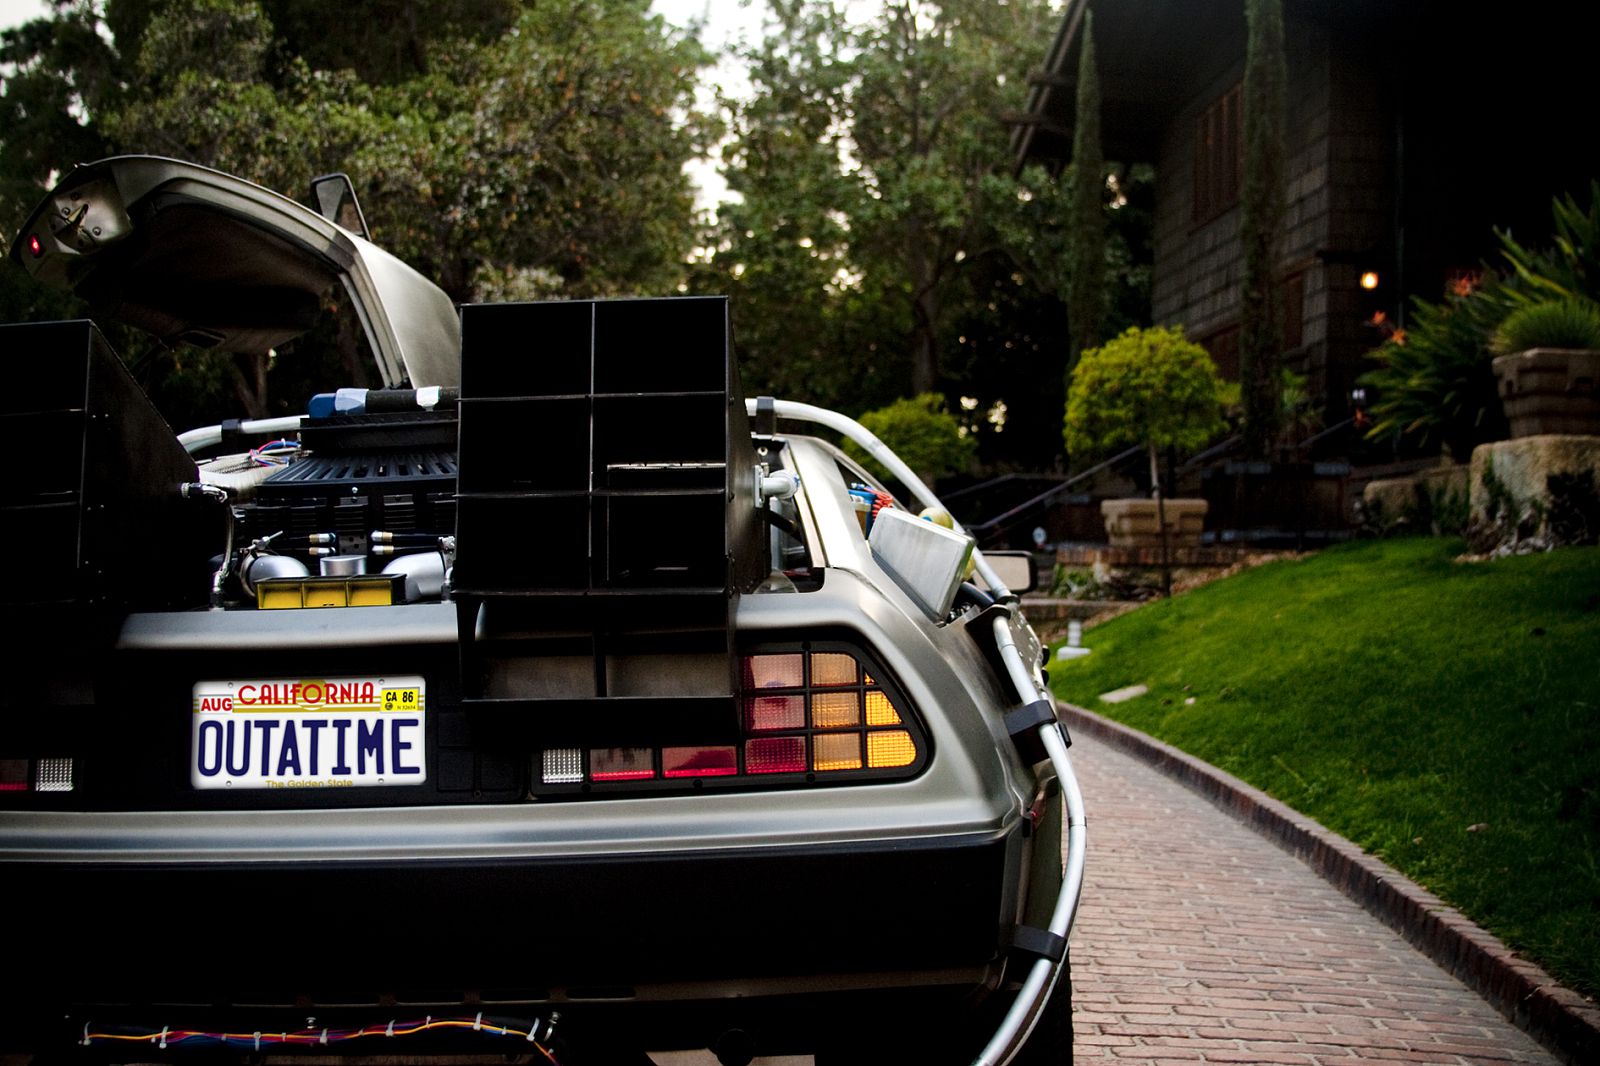 Movie Back To The Future Wallpaper 1600x1066 Movie Back To The Future